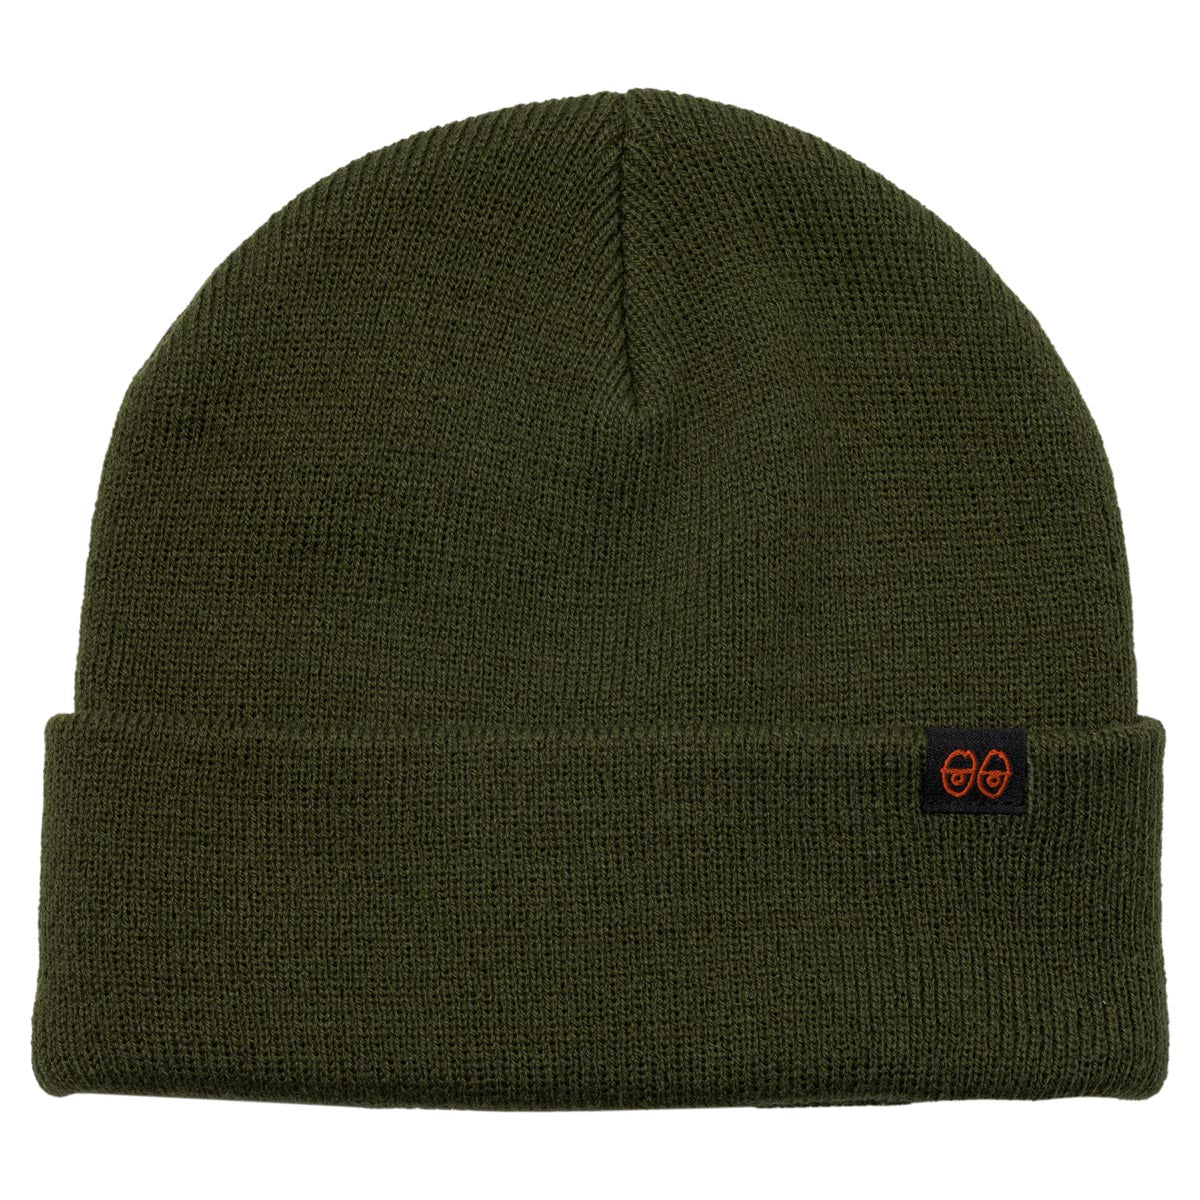 Krooked Eyes Clip Beanie - Olive/Red image 1